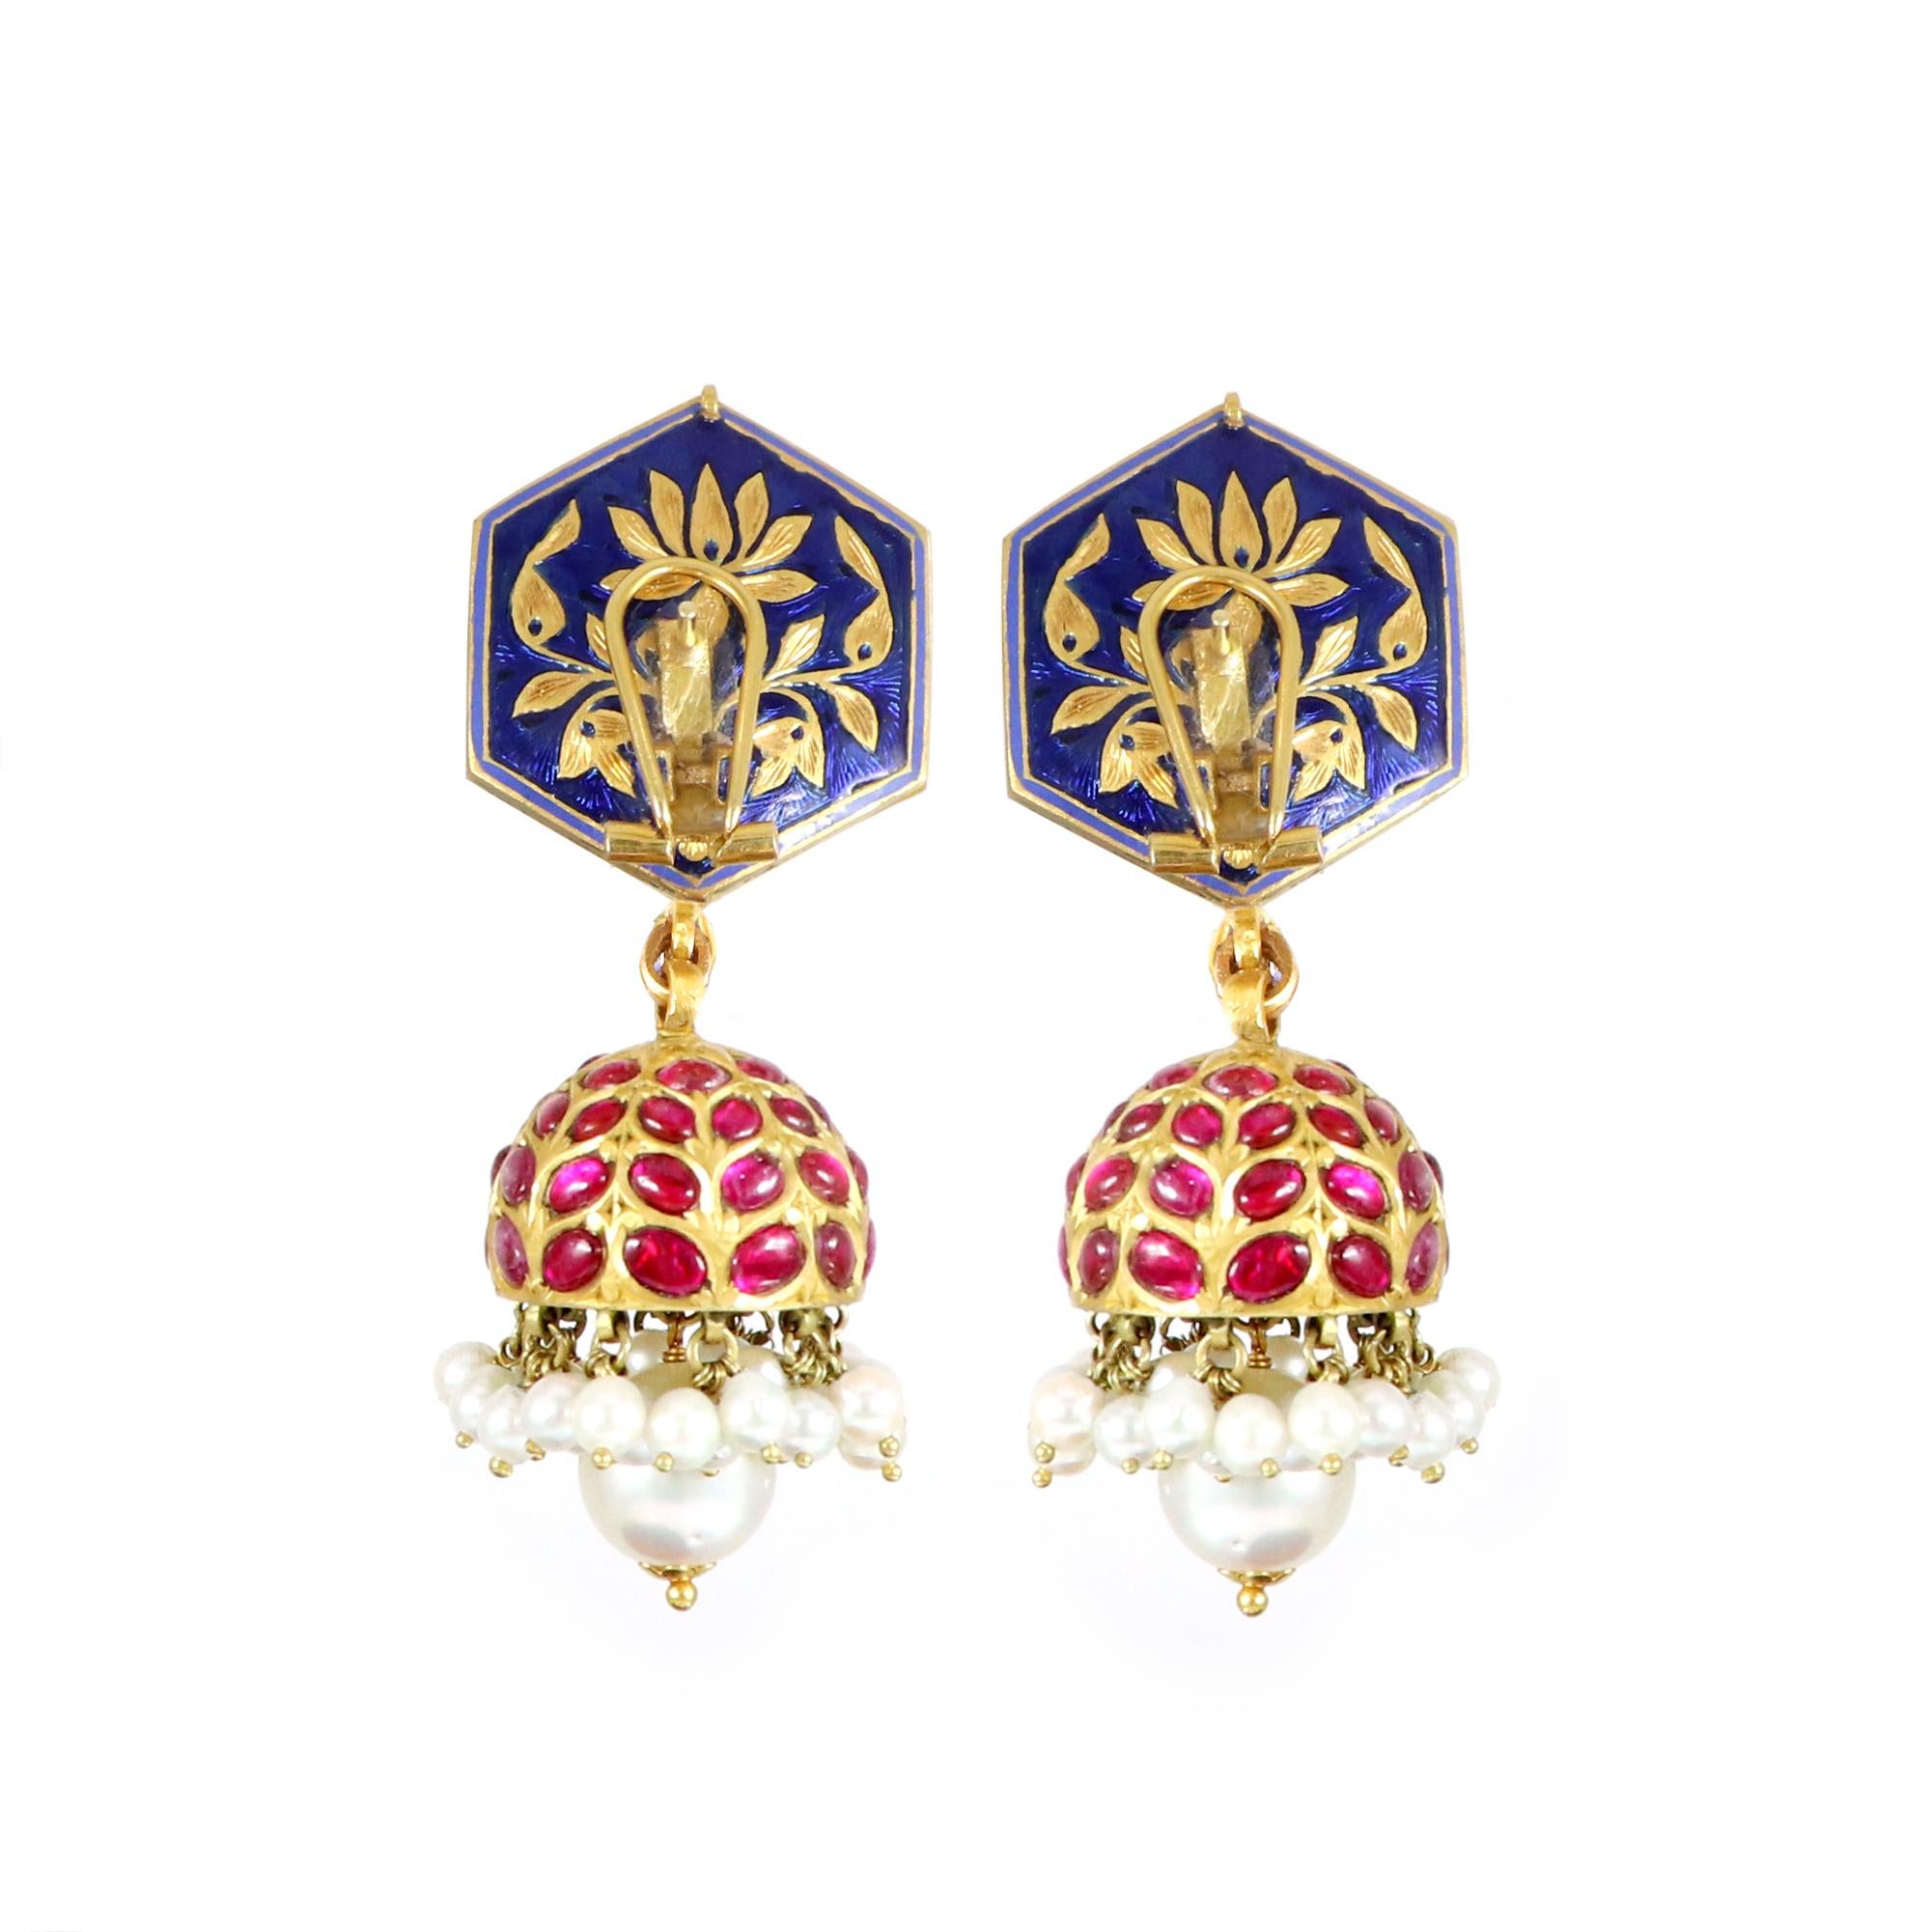 Discover our exquisite collection of Ruby Jhumki earrings, adorned with uncut diamonds that are crafted in 18K yellow gold. These stunning pieces are a true testament to timeless elegance and luxury, designed to captivate attention and exude